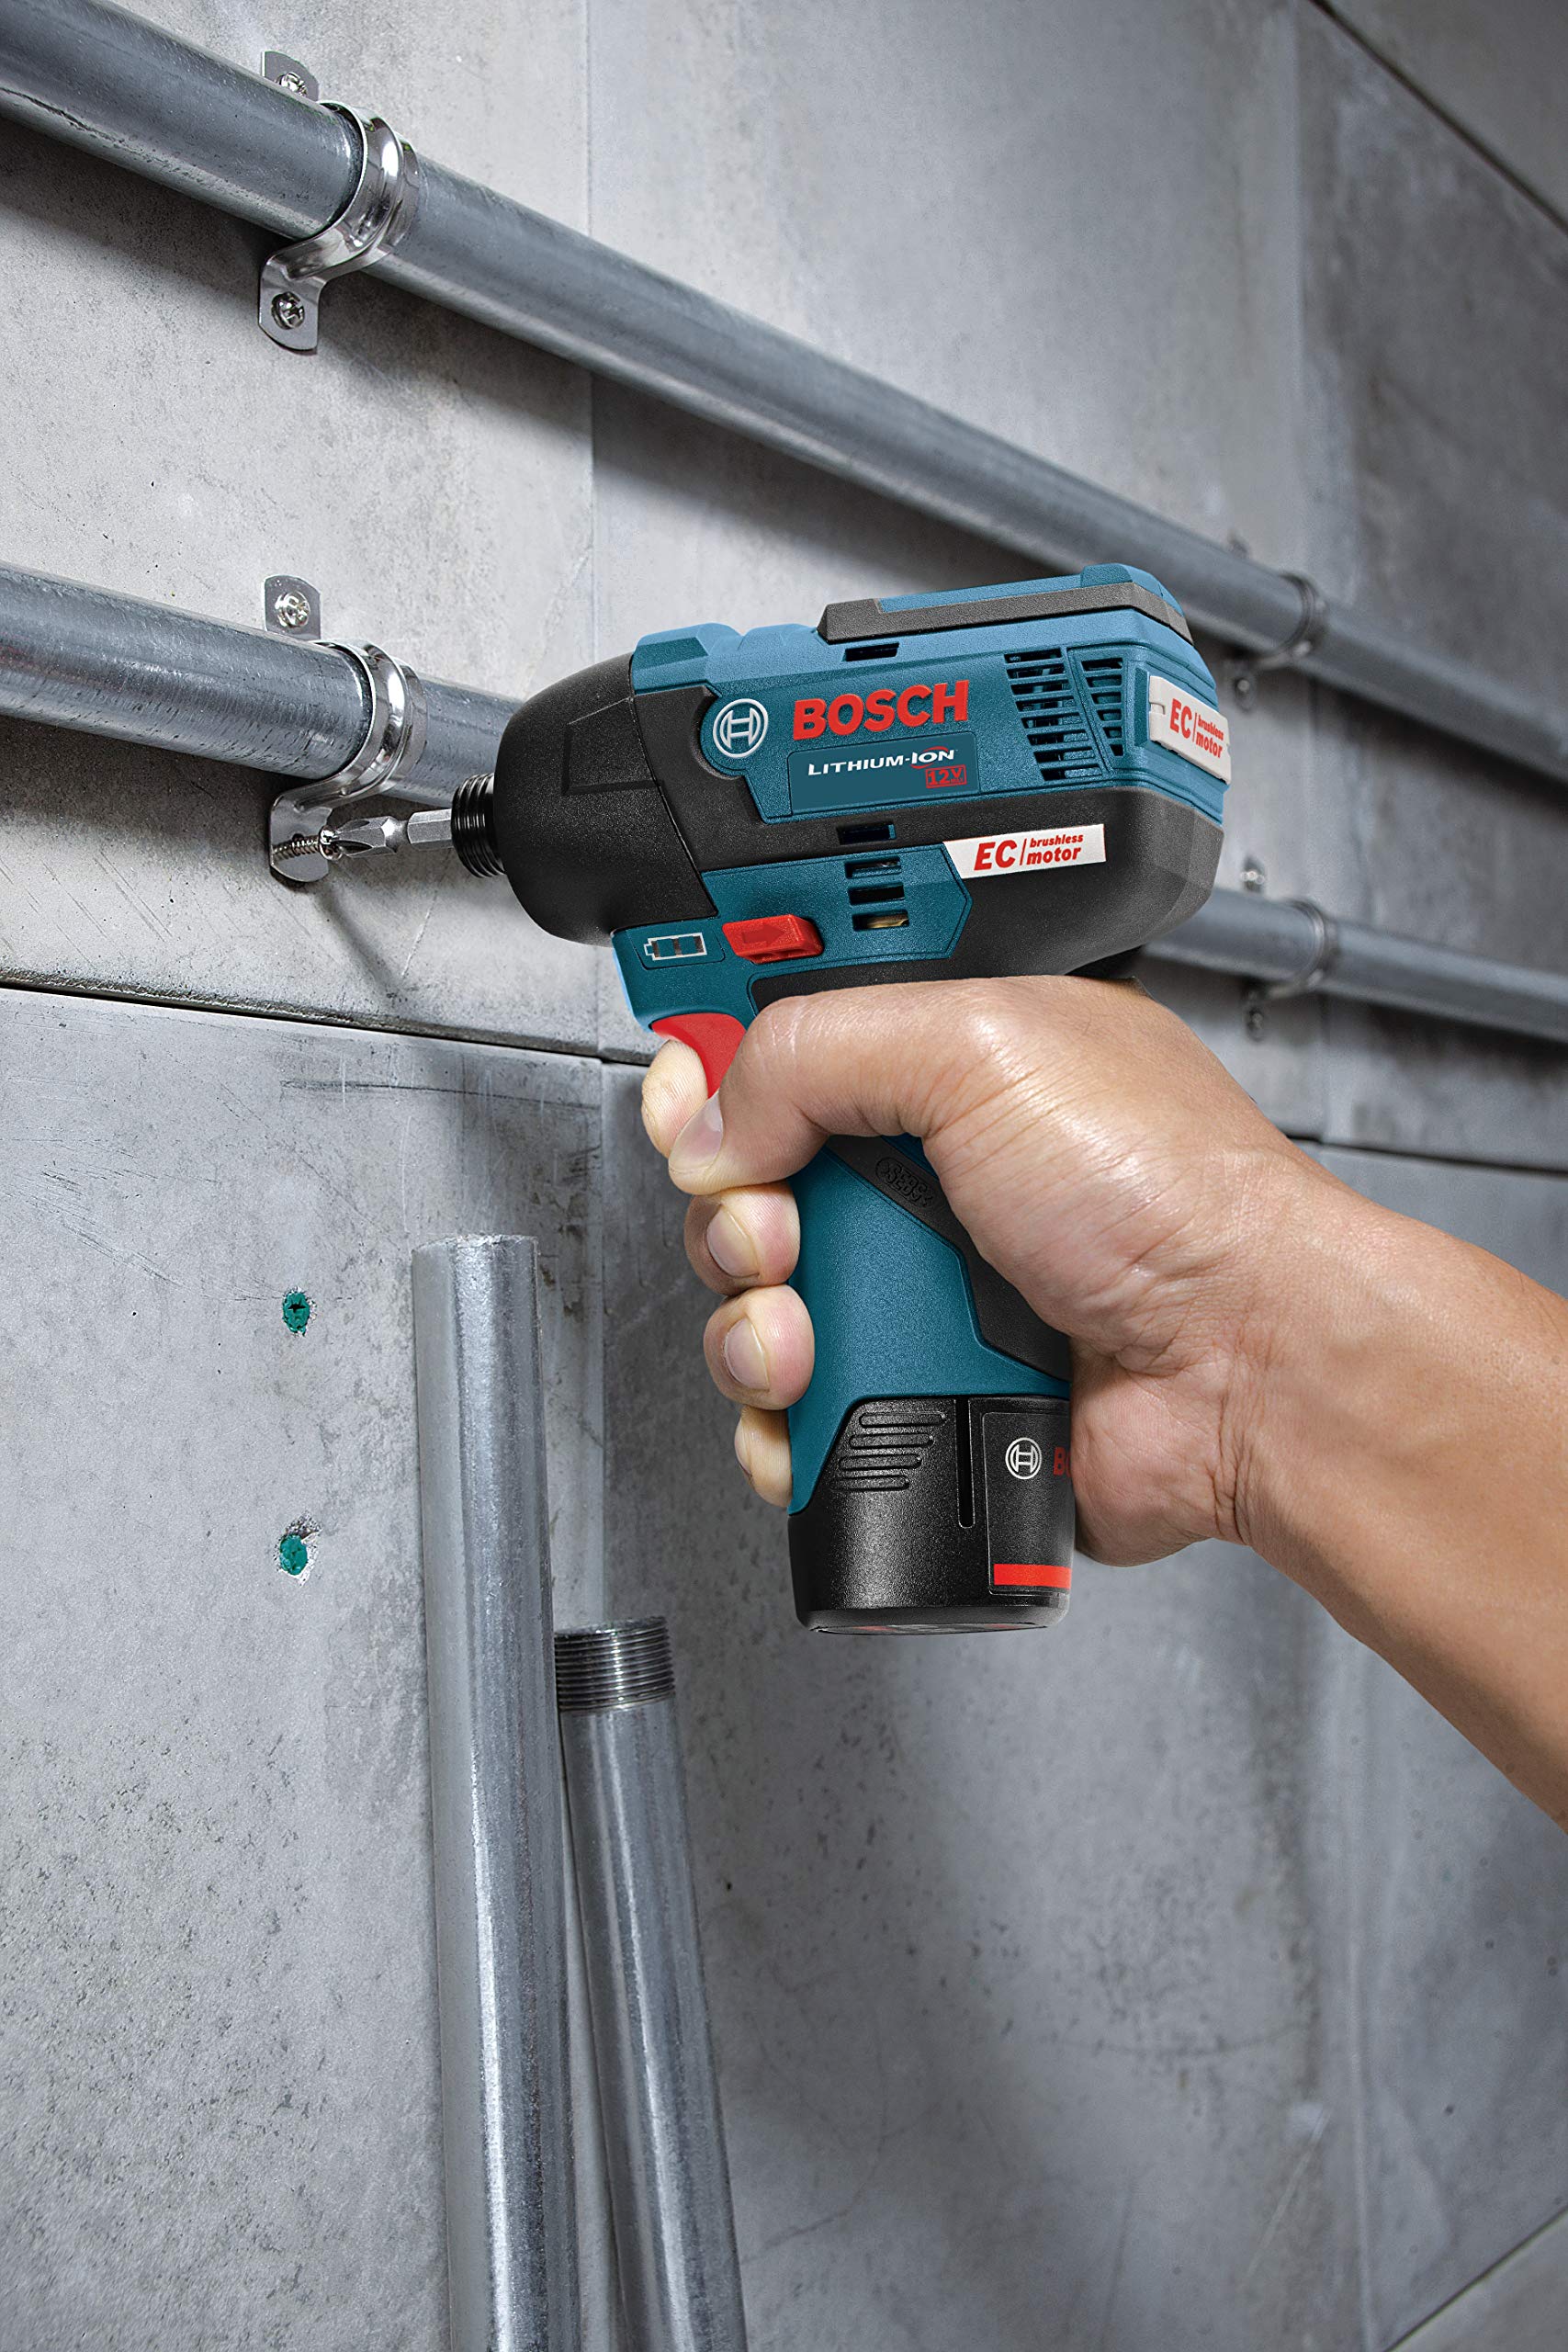 BOSCH GXL12V-220B22 12V Max 2-Tool Brushless Combo Kit with 3/8 In. Drill/Driver, 1/4 In. Hex Impact Driver and (2) 2.0 Ah Batteries, Brushless 12V Kit